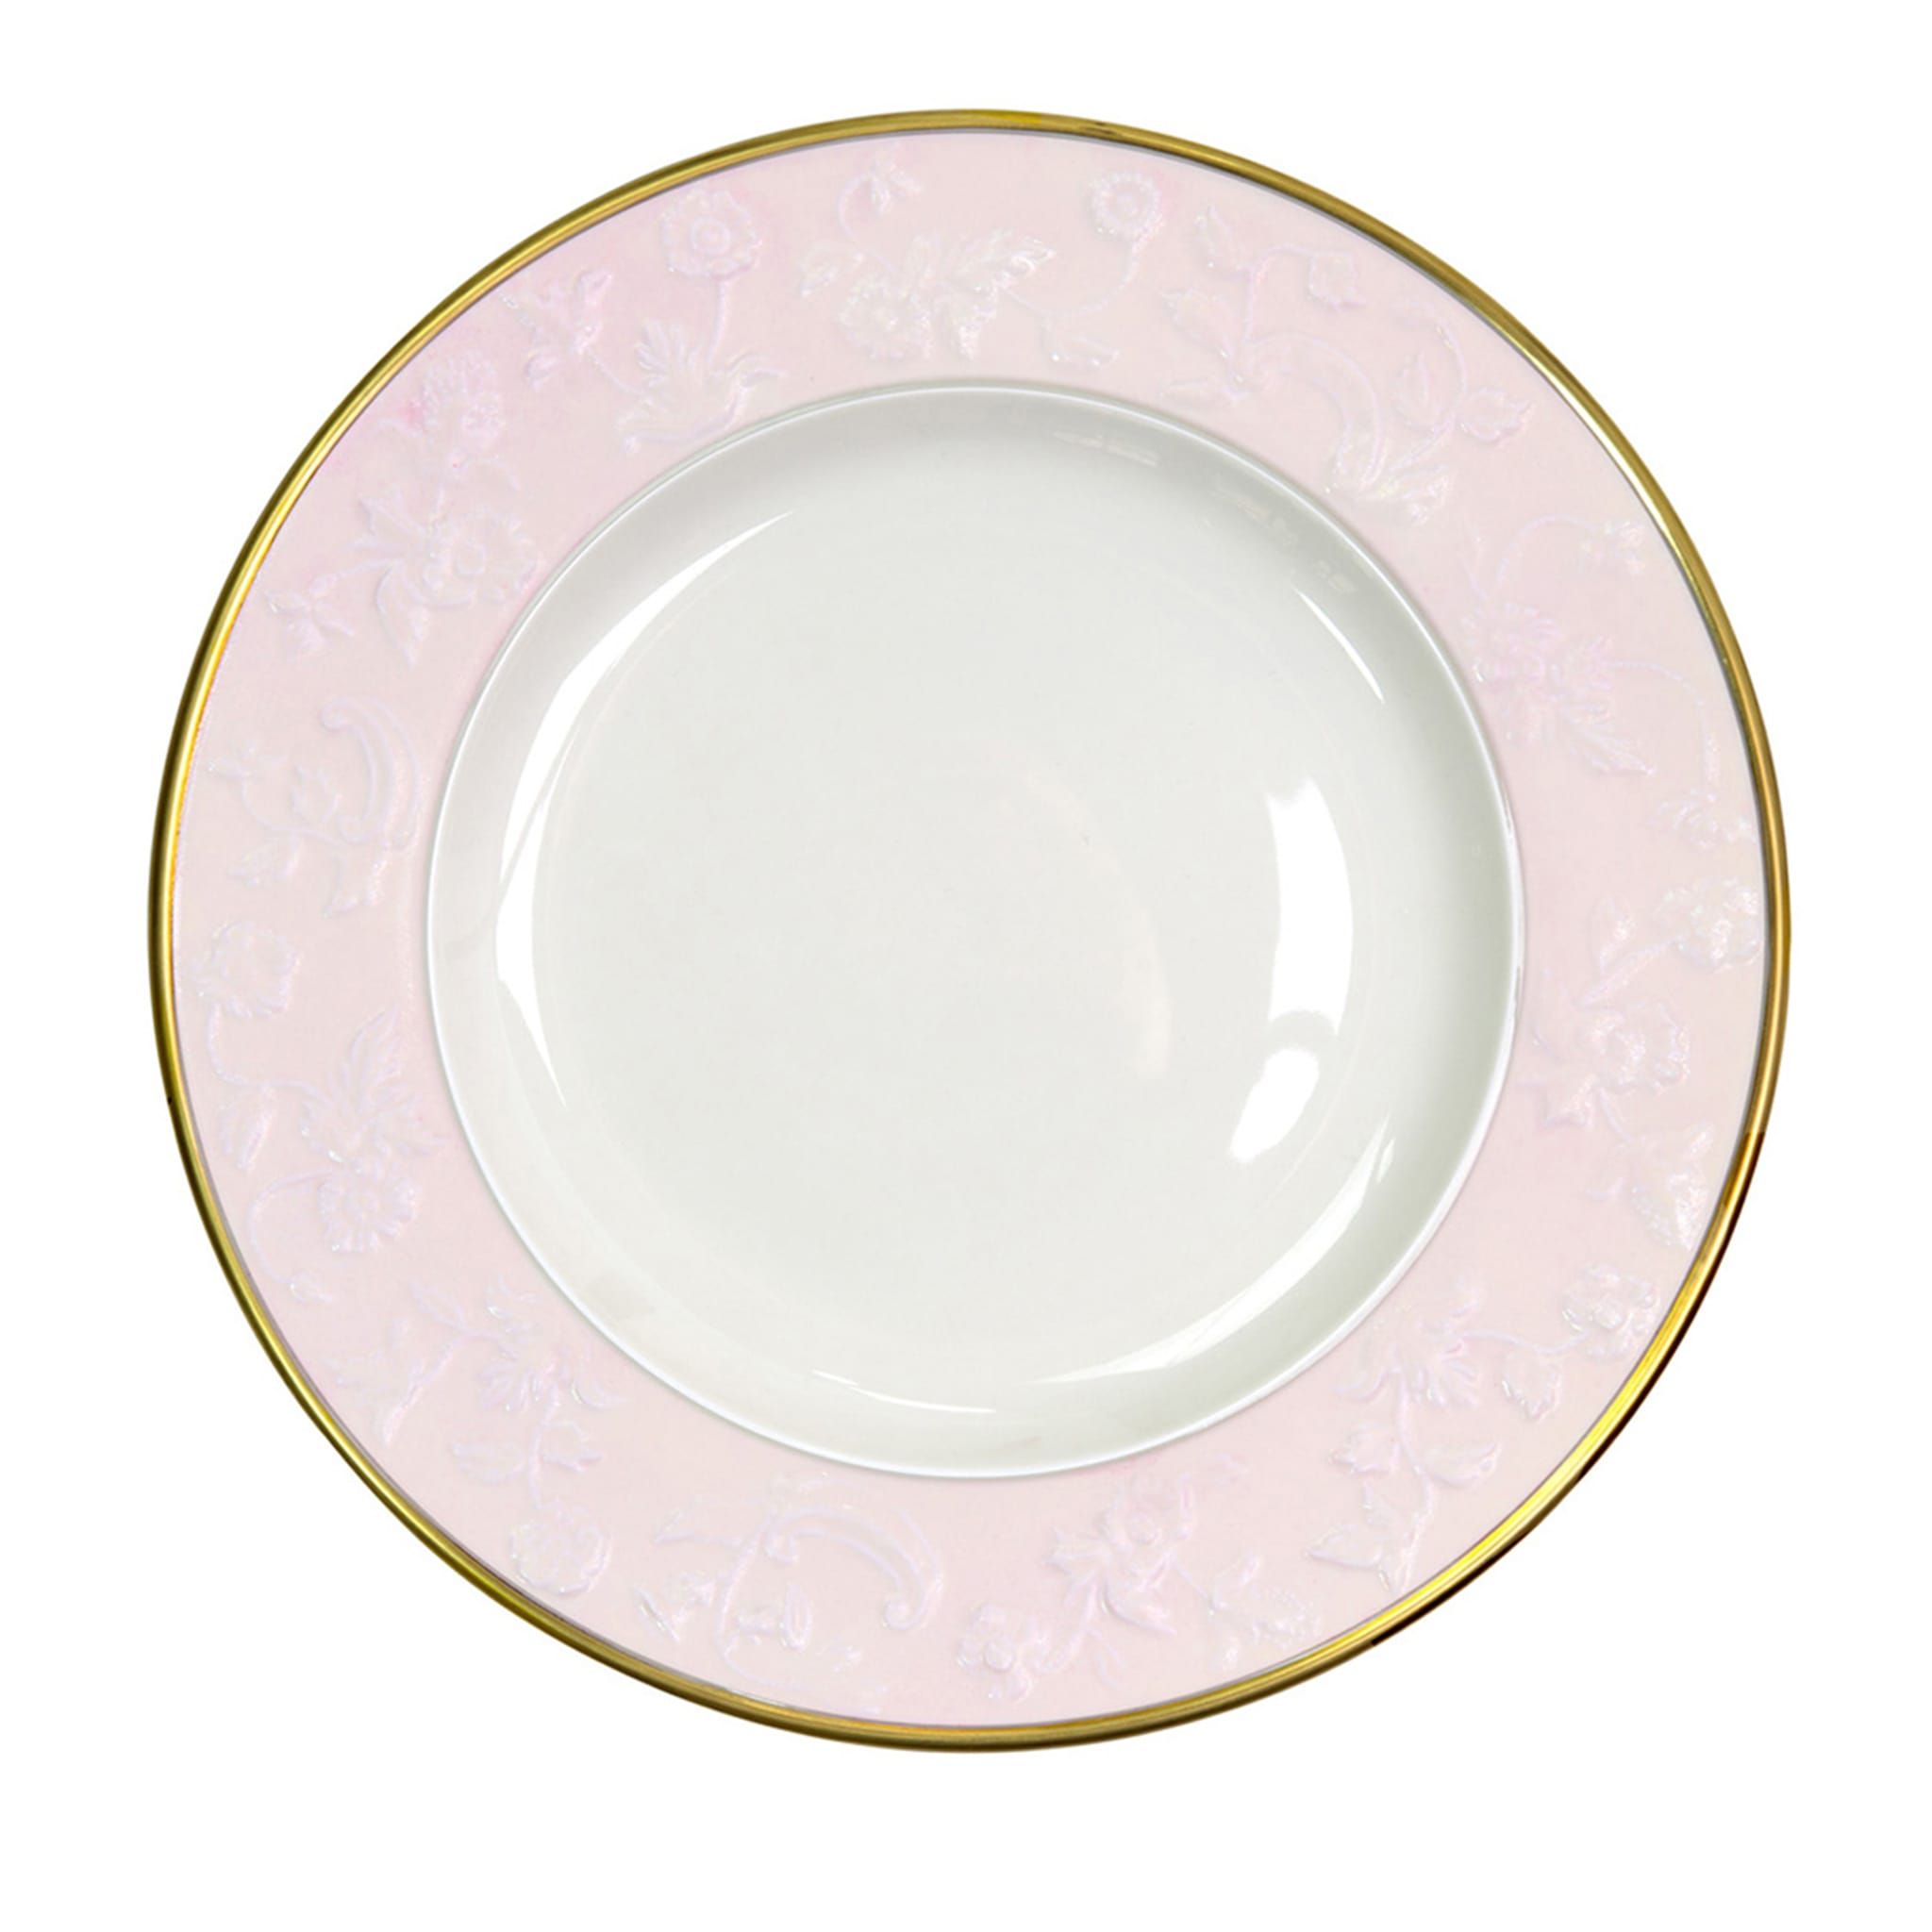 TAORMINA DINNER PLATE - PINK AND GOLD - Main view